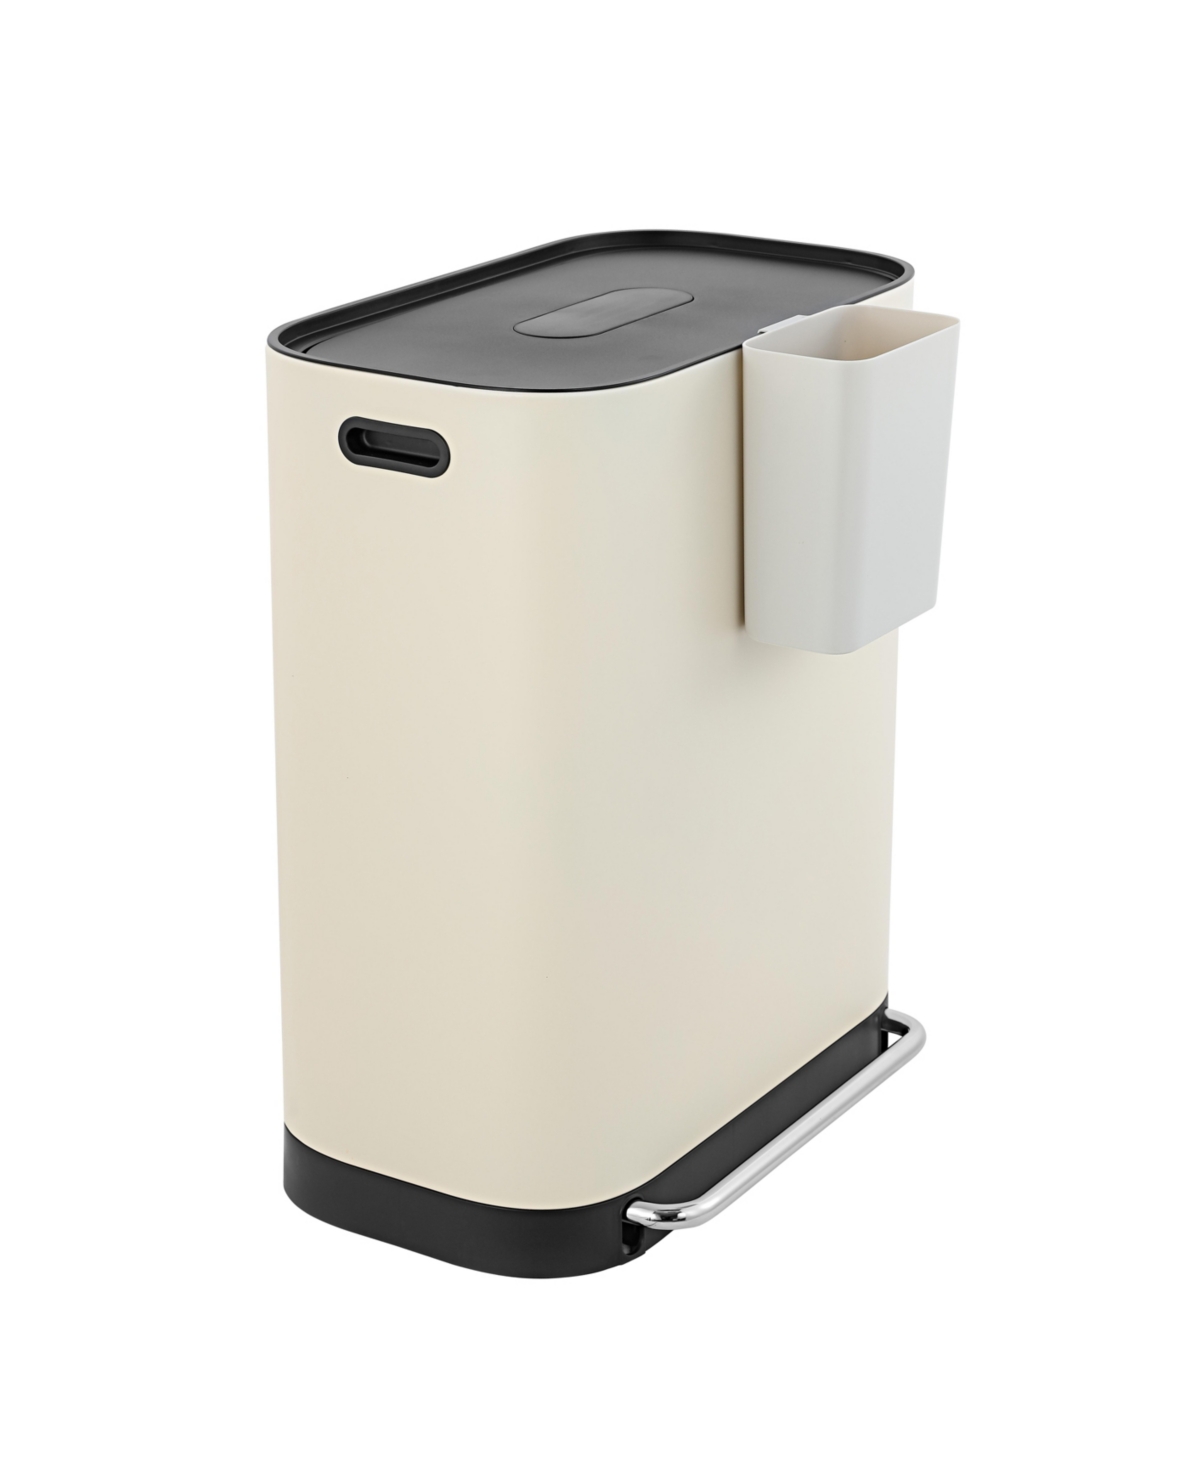 Beni Kitchen Trash/Recycling Double-Bucket Step-Open Trash Can with Liners - Almond